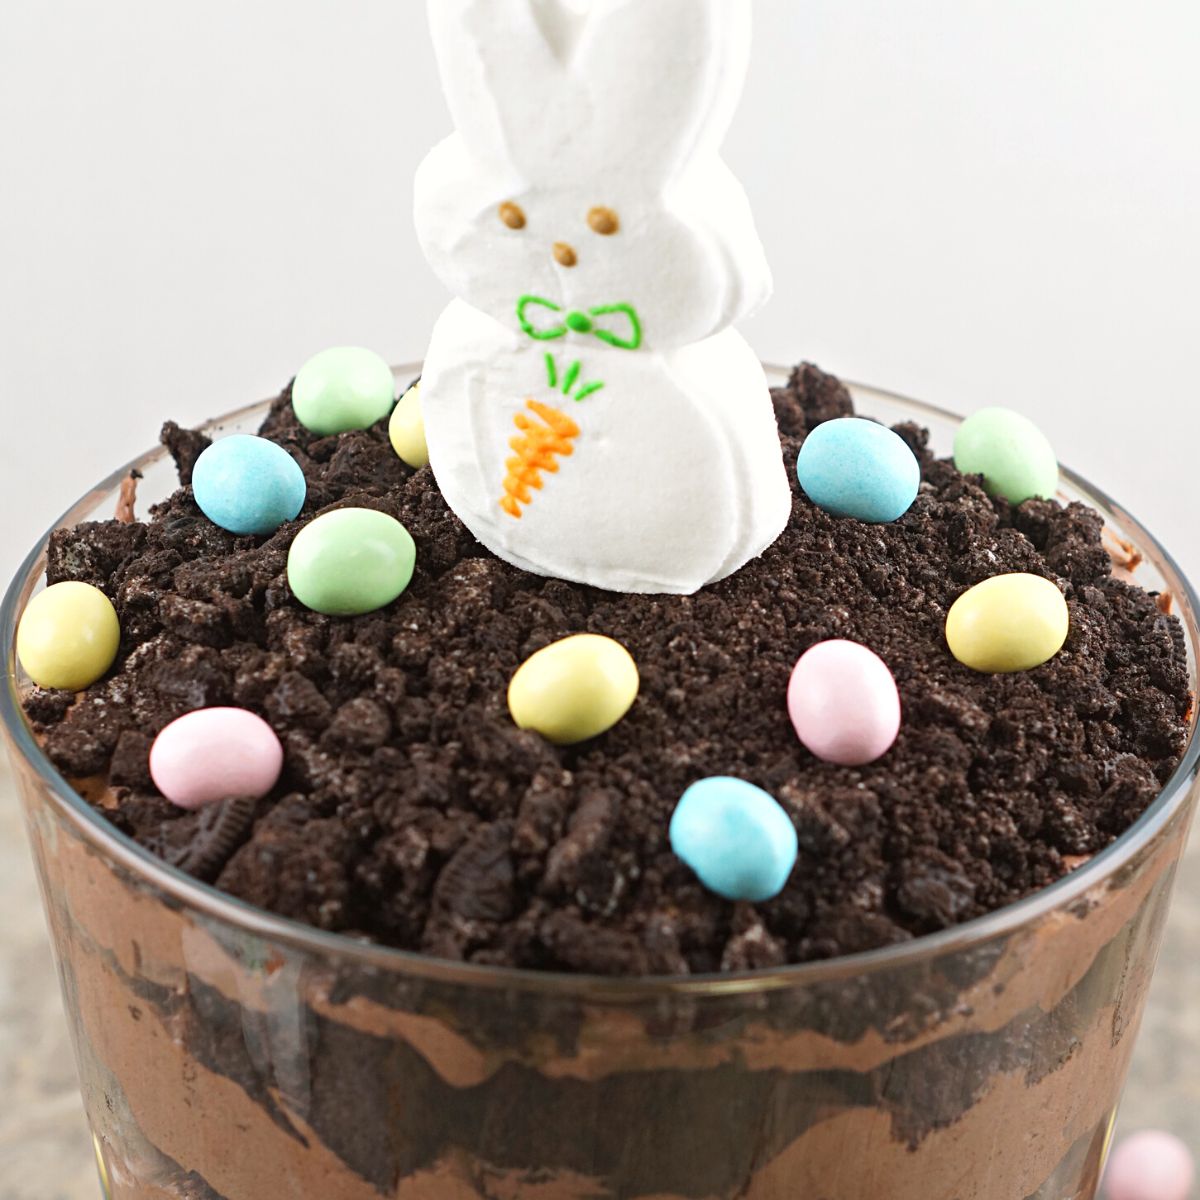 https://thedomesticdiva.org/wp-content/uploads/2016/03/Easter-Dirt-Cake-Trifle-Recipe.jpg